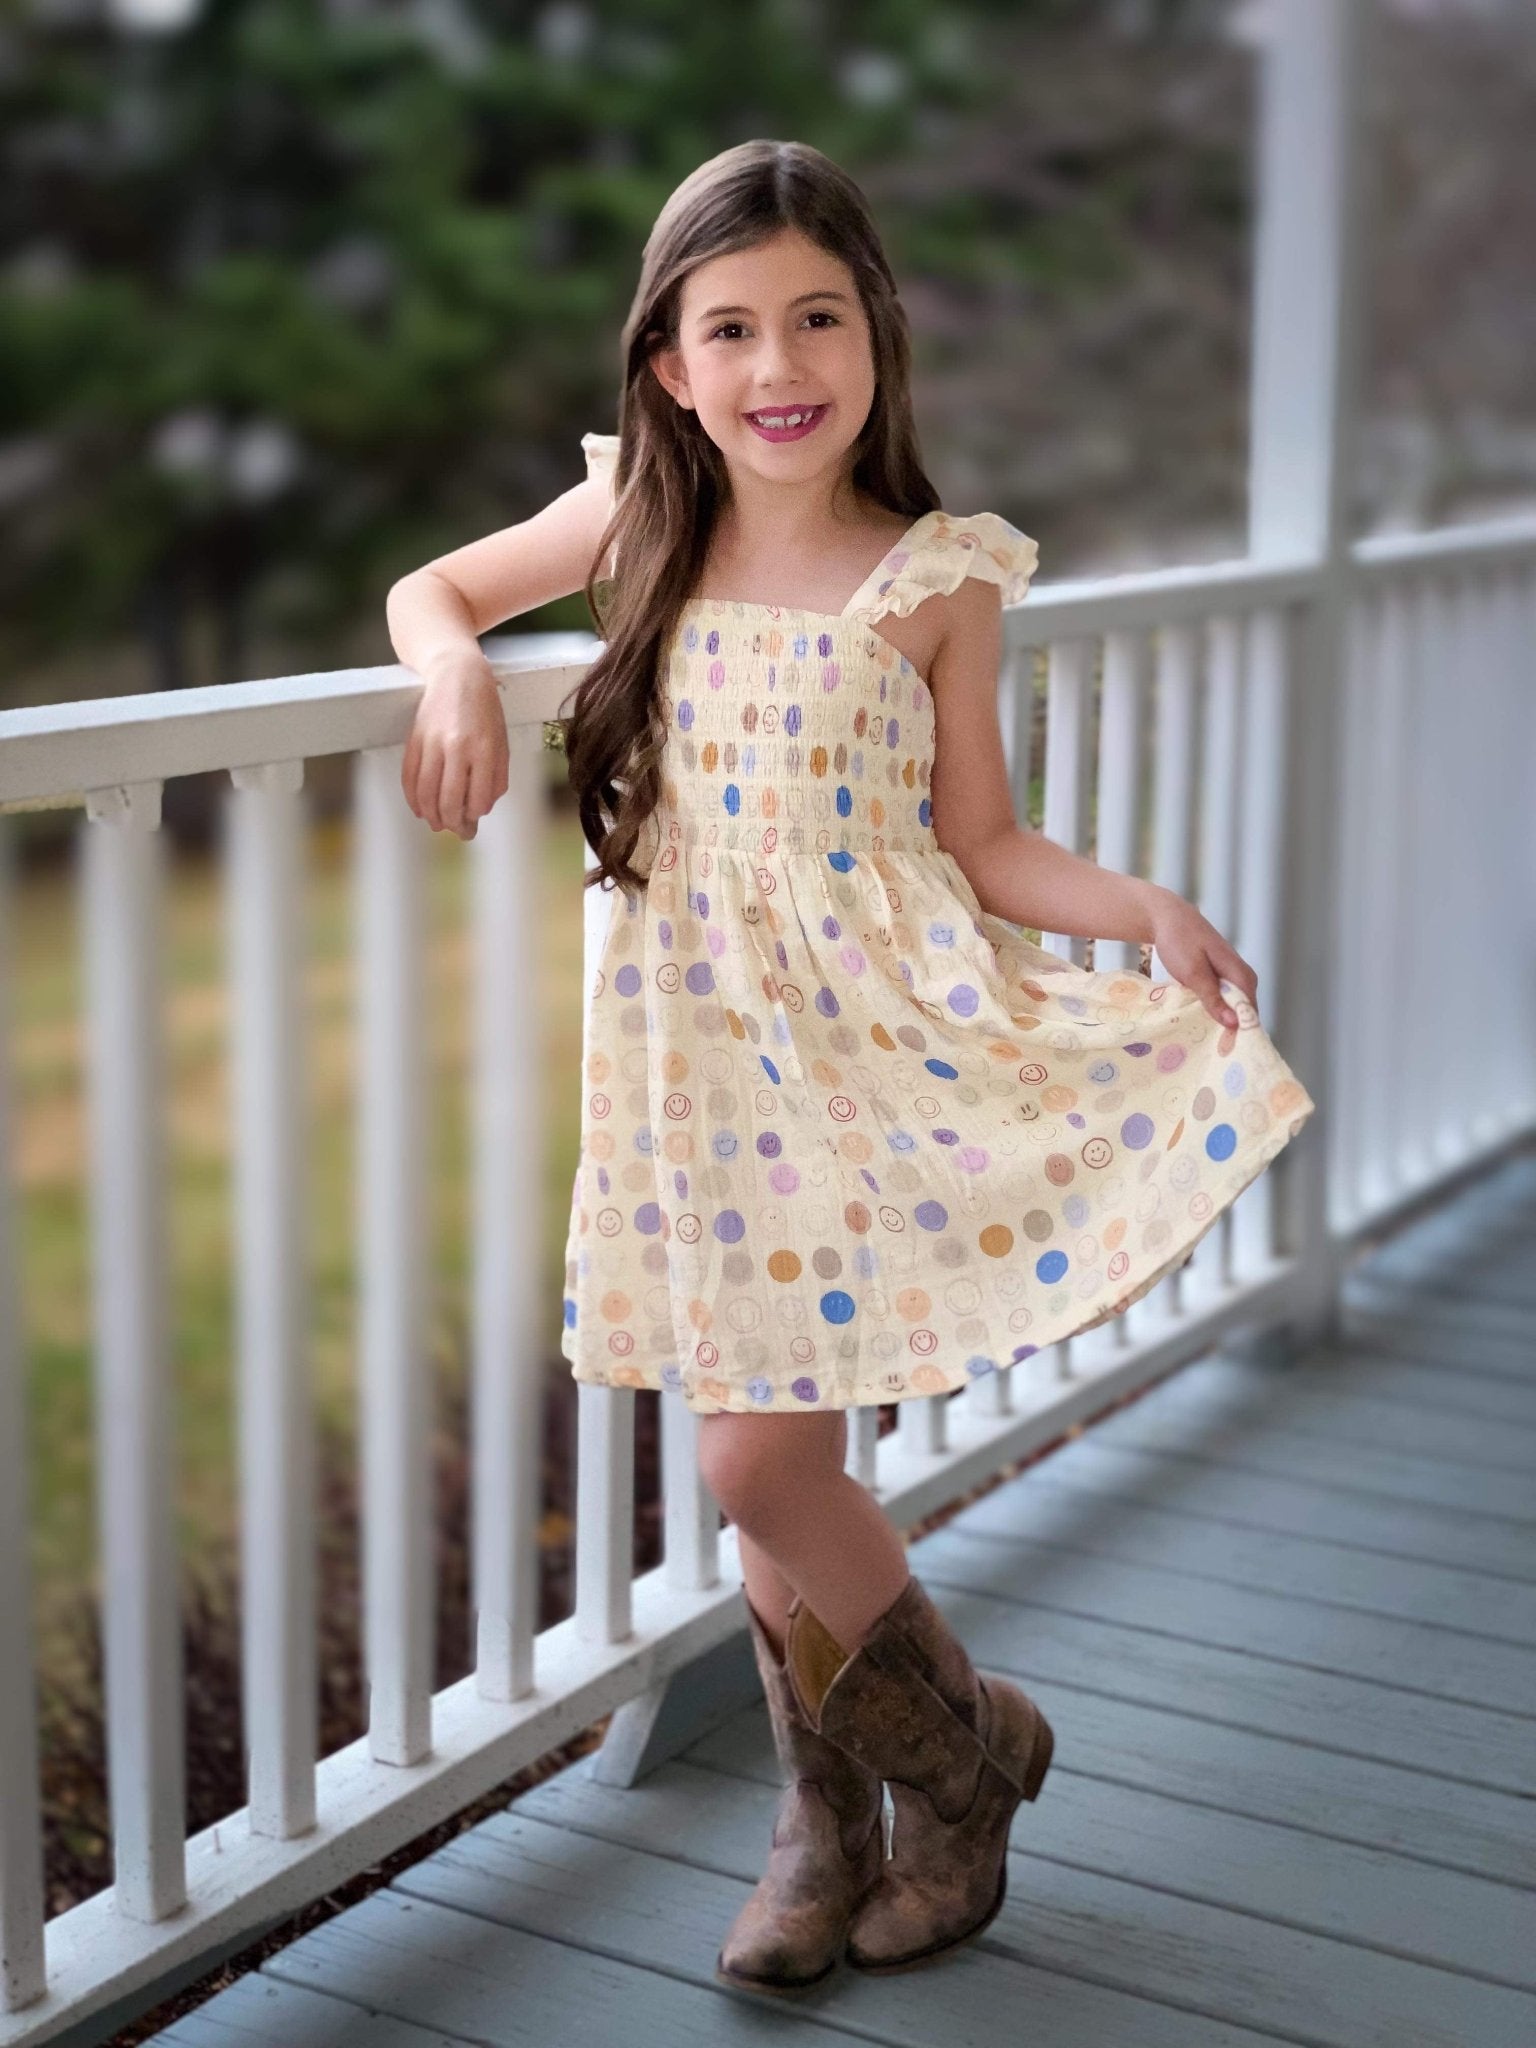 All Smiles Lavender, Lilac, and Khaki Multicolor Printed Woven Dress - Evie's Closet Clothing